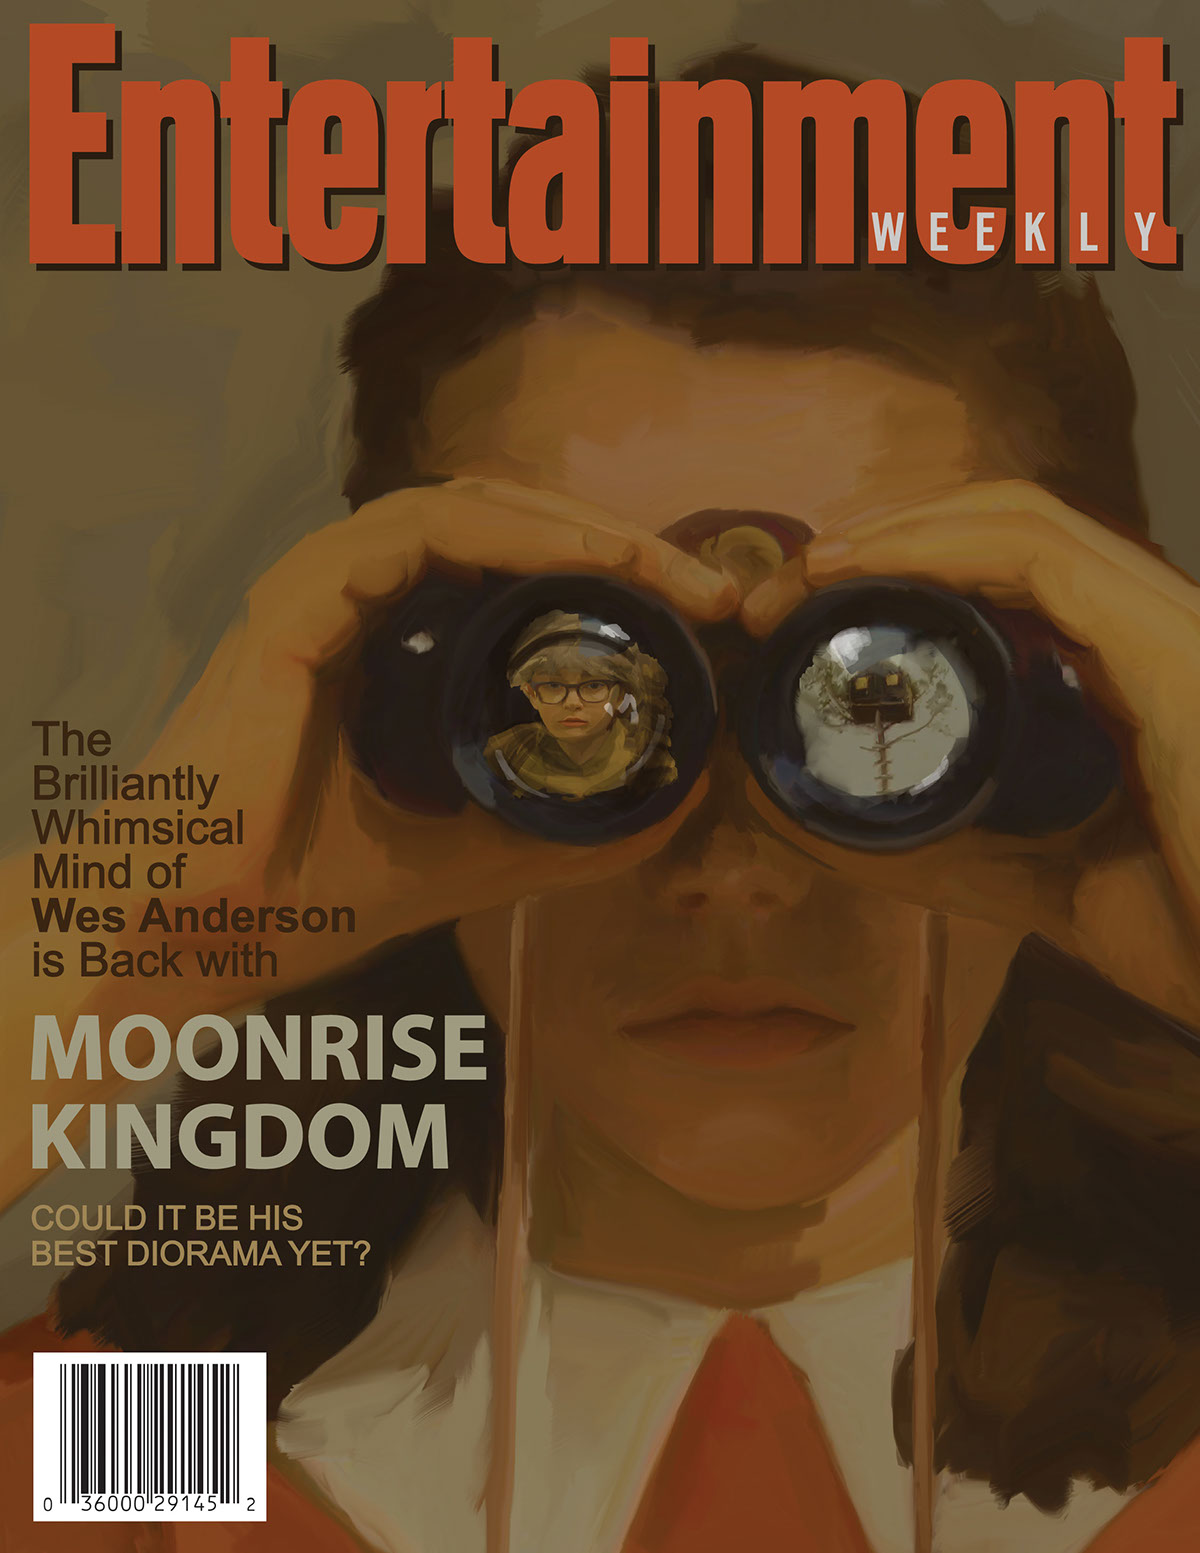 Moonrise Kingdom entertainment weekly digital painting magazine cover Ps25Under25